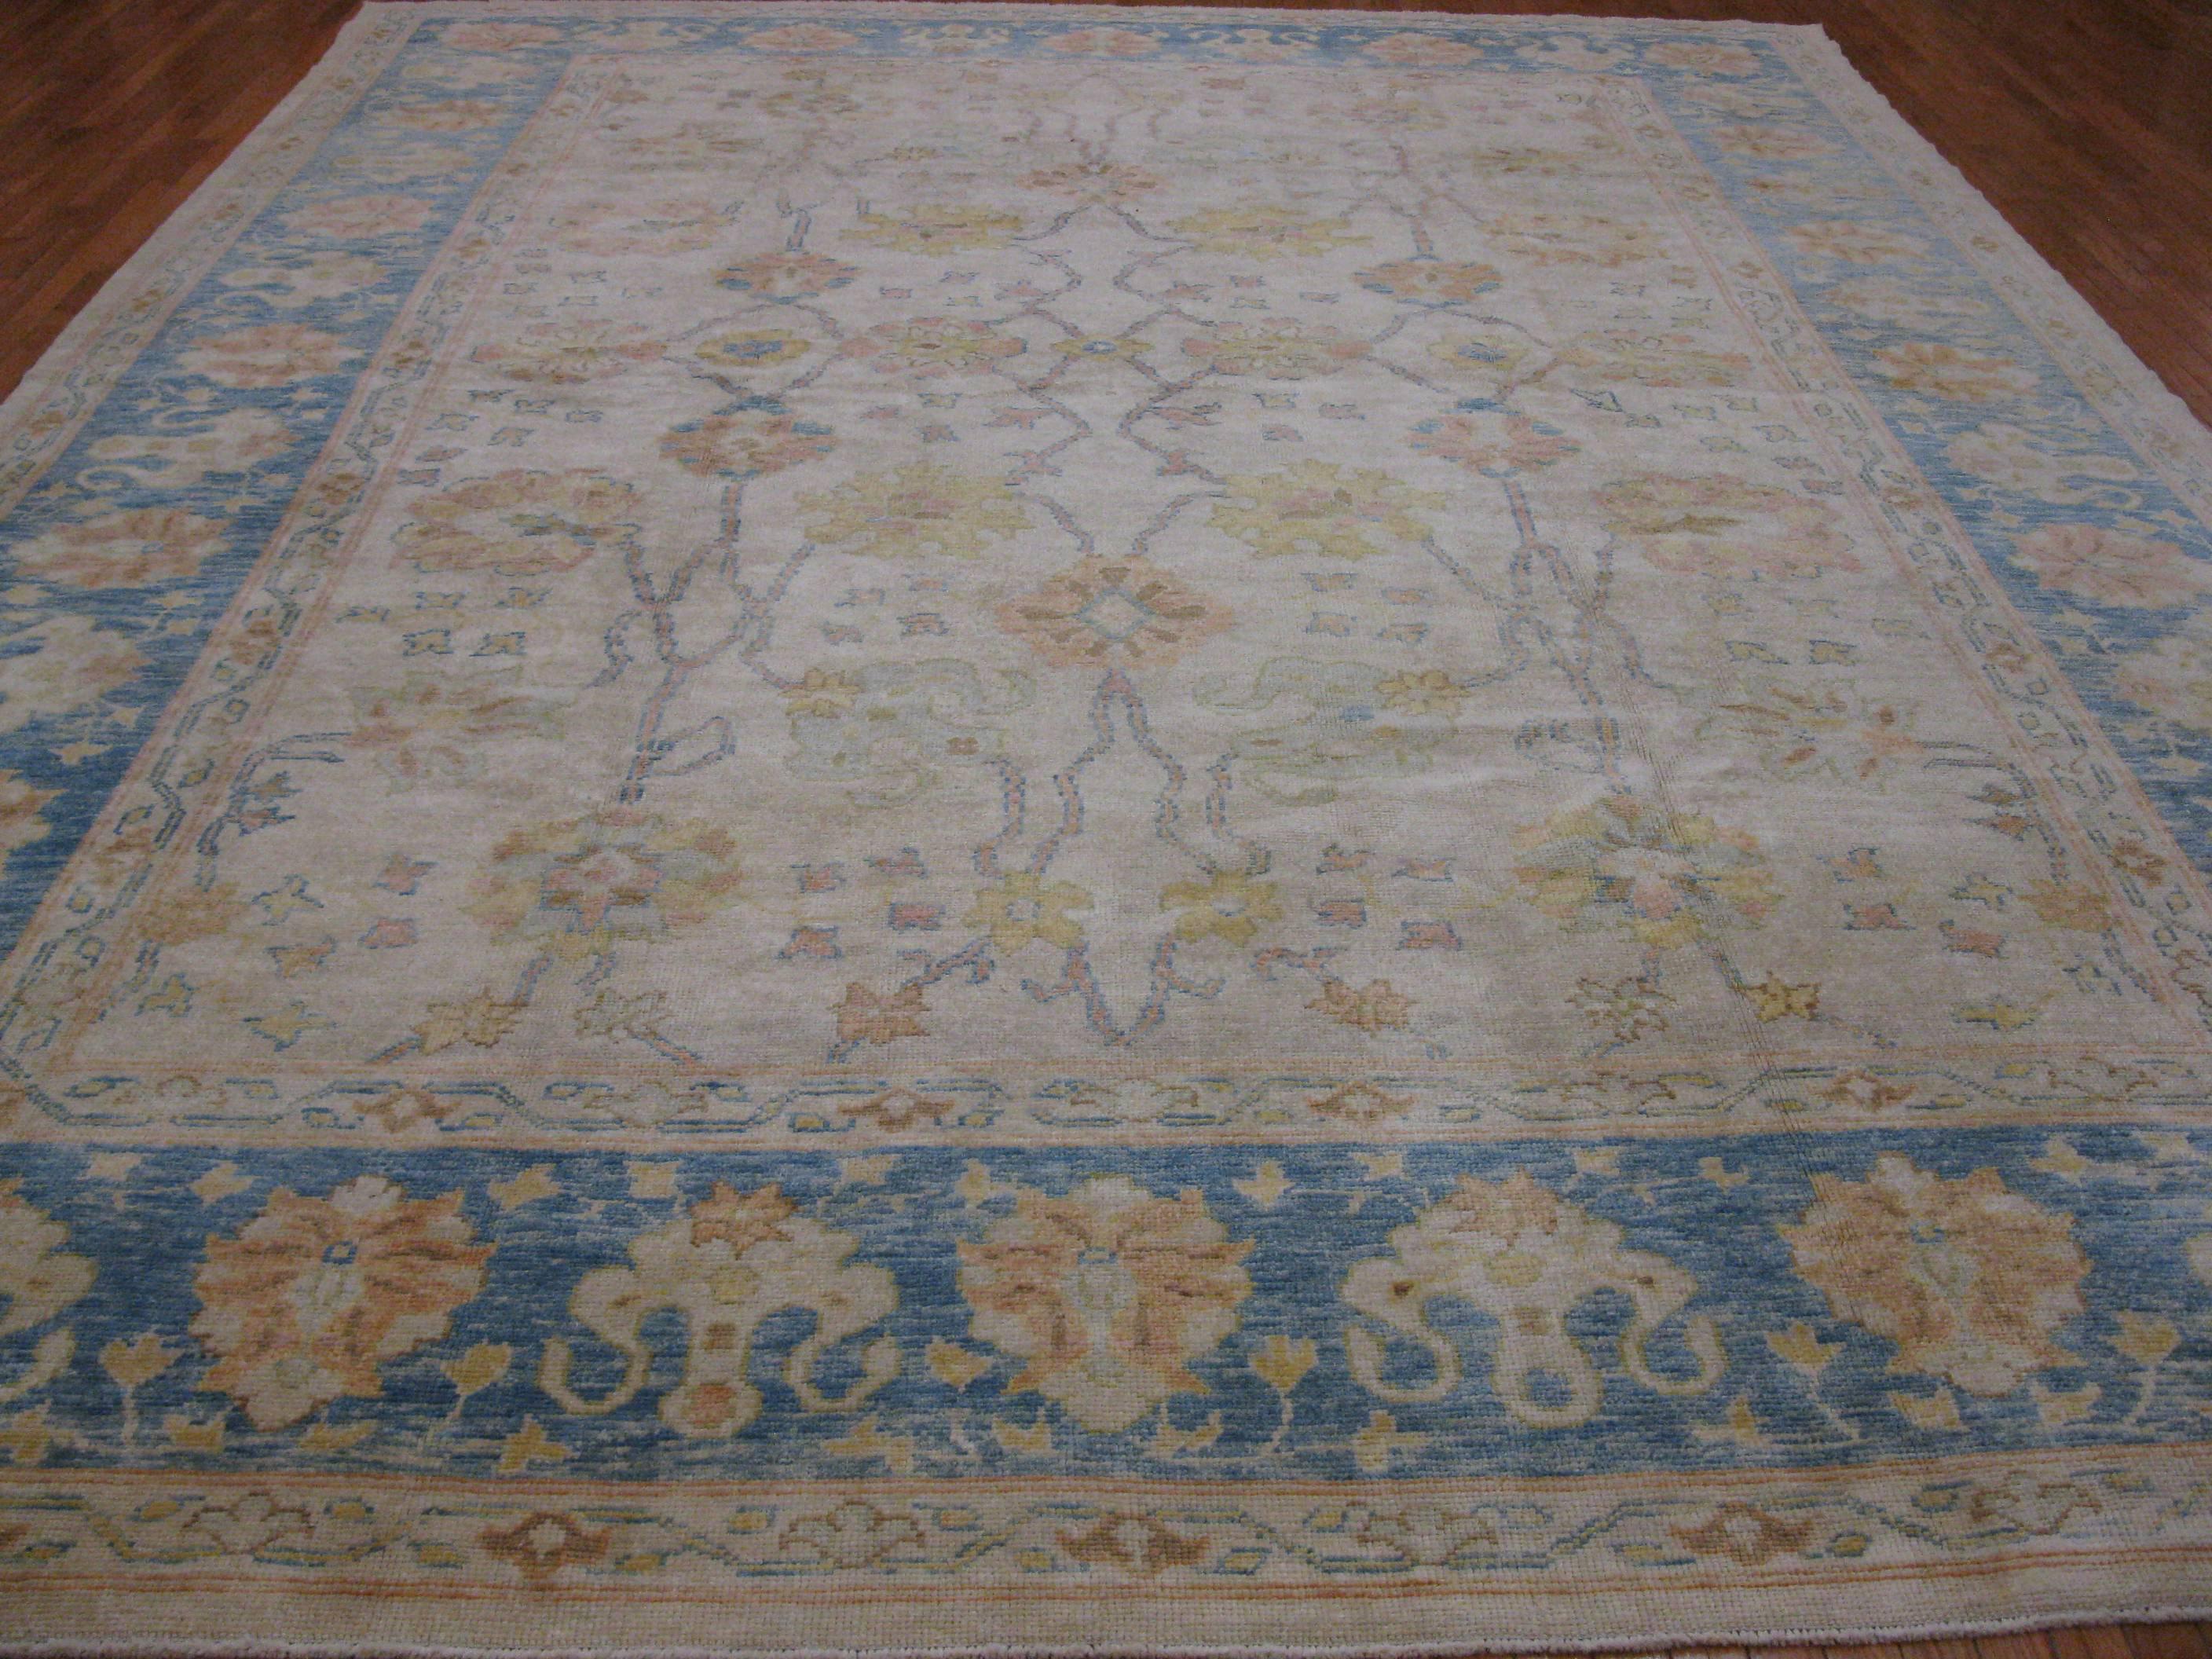 This is a beautiful large room size hand-knotted antique look Turkish Oushak rug with an easy to use all-over pattern. The rug is made with all natural wool and vegetable dyes. It measures 11' 2'' x 14' 10''.